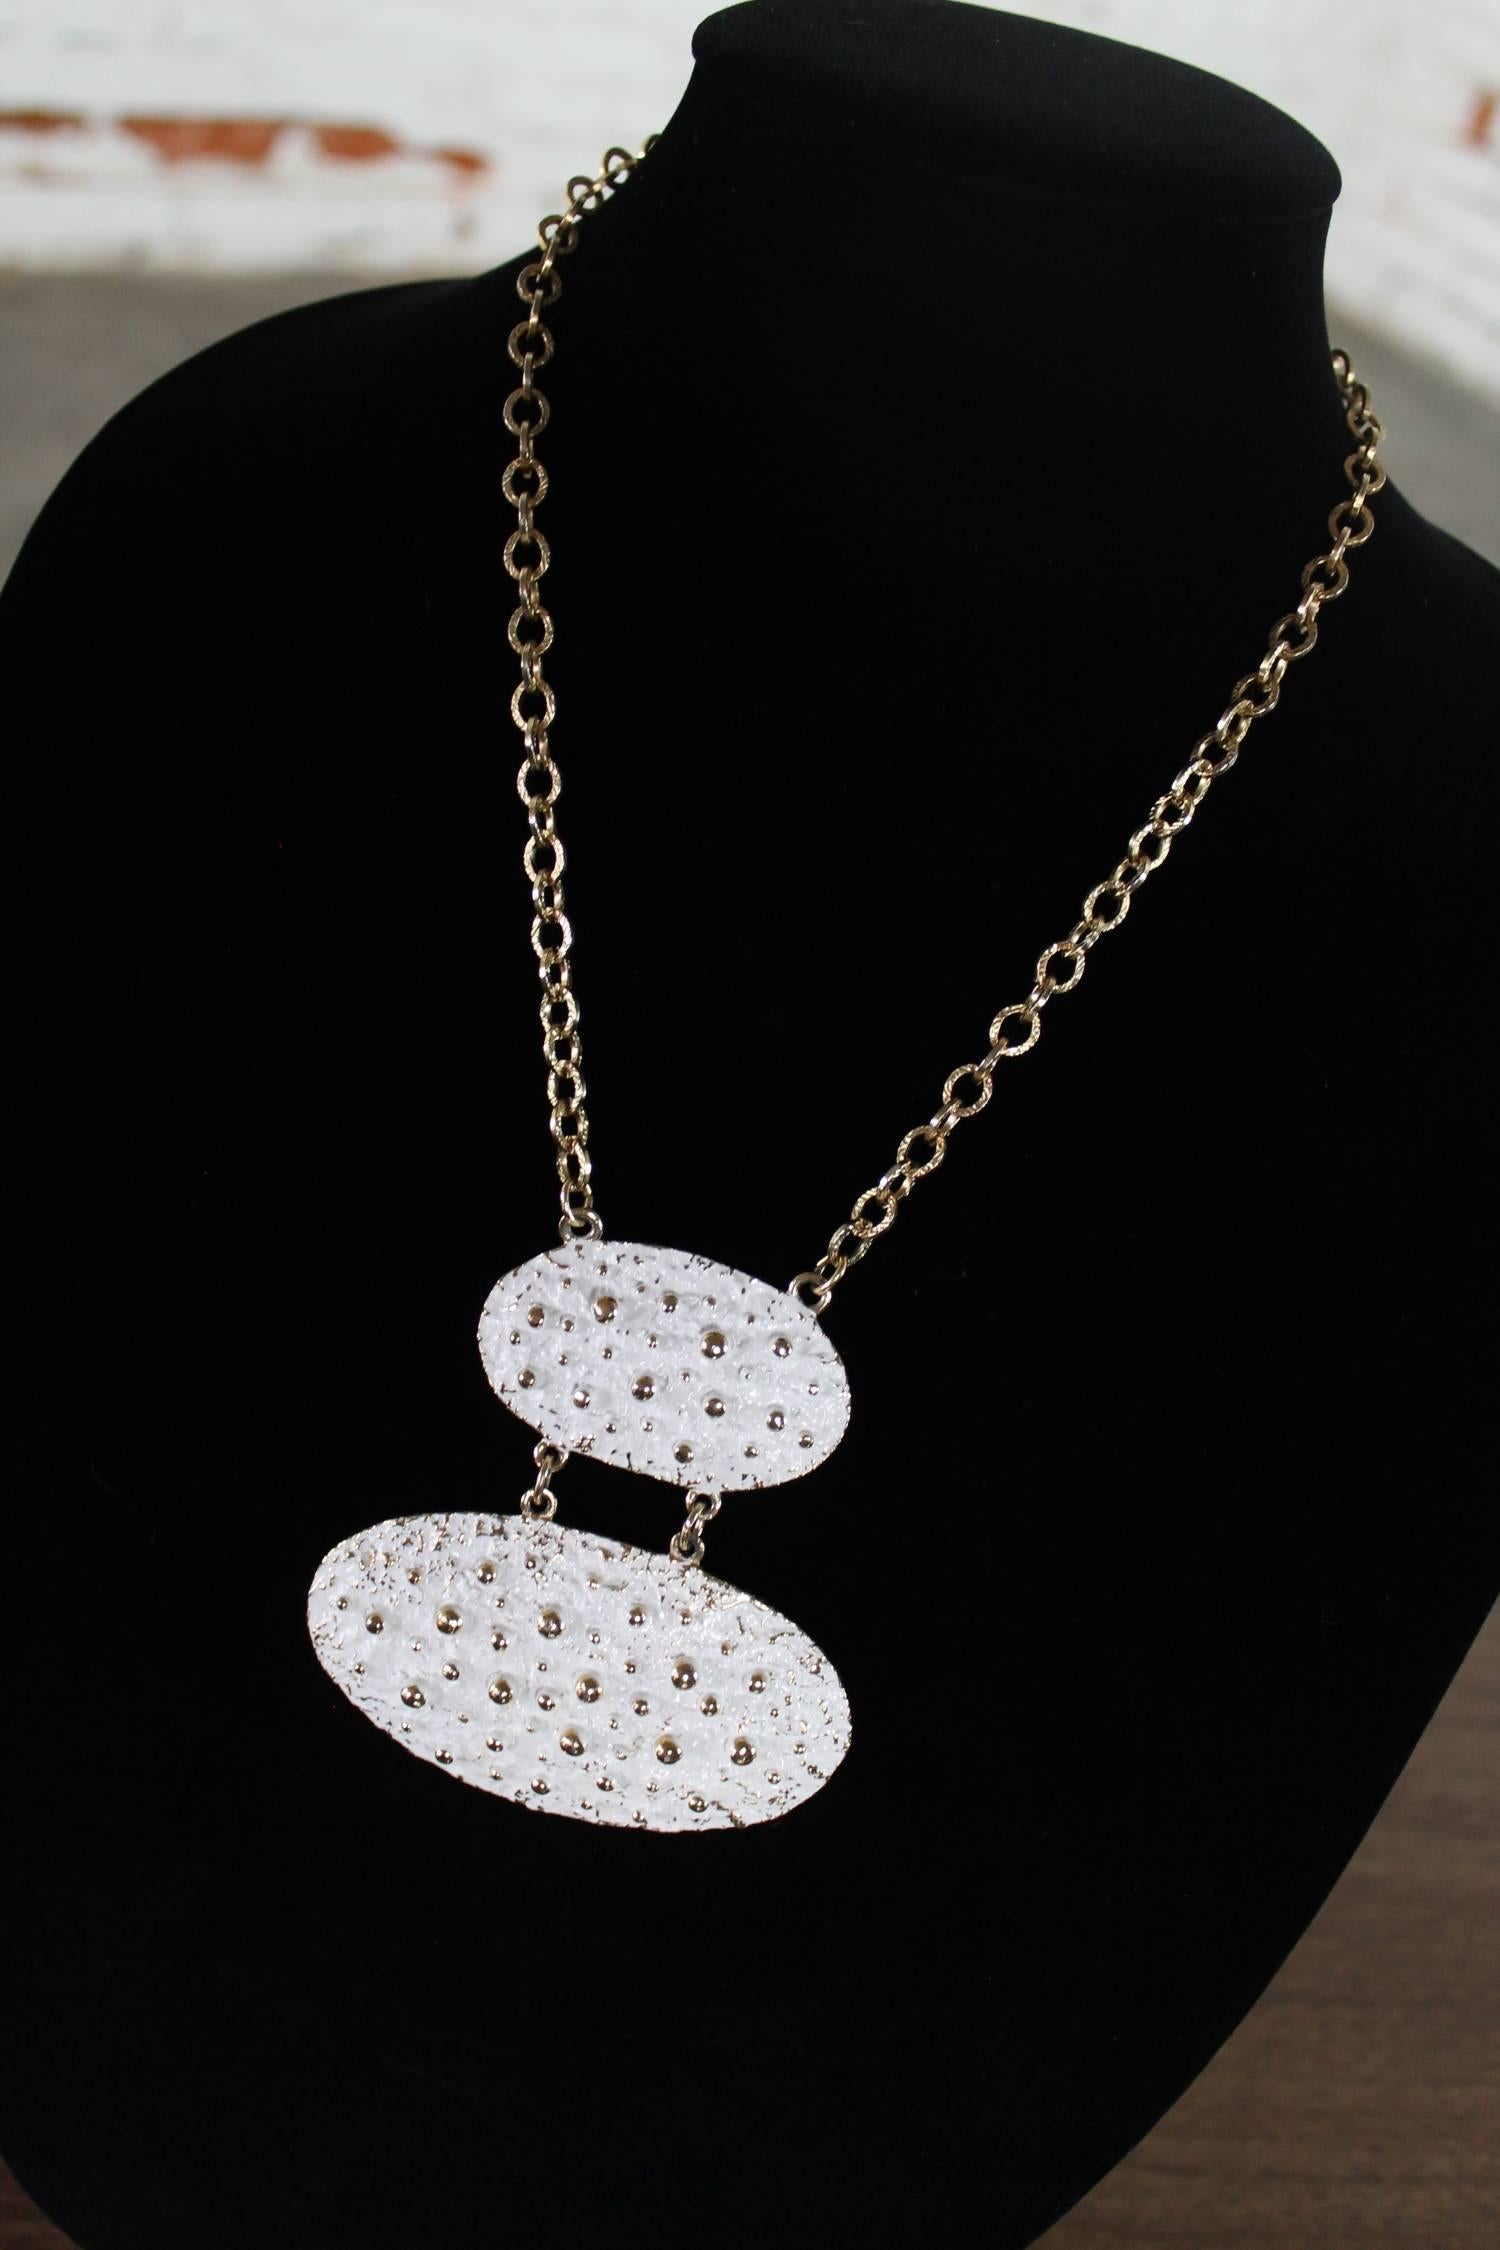 Gorgeous vintage white enamel and gold-tone Napier necklace in a chunky Brutalist, 1970s mod styling. Attributed to Francis Fujio this huge pendant necklace will make a statement whatever the outfit you wear it with.

Oh my goodness this is such a